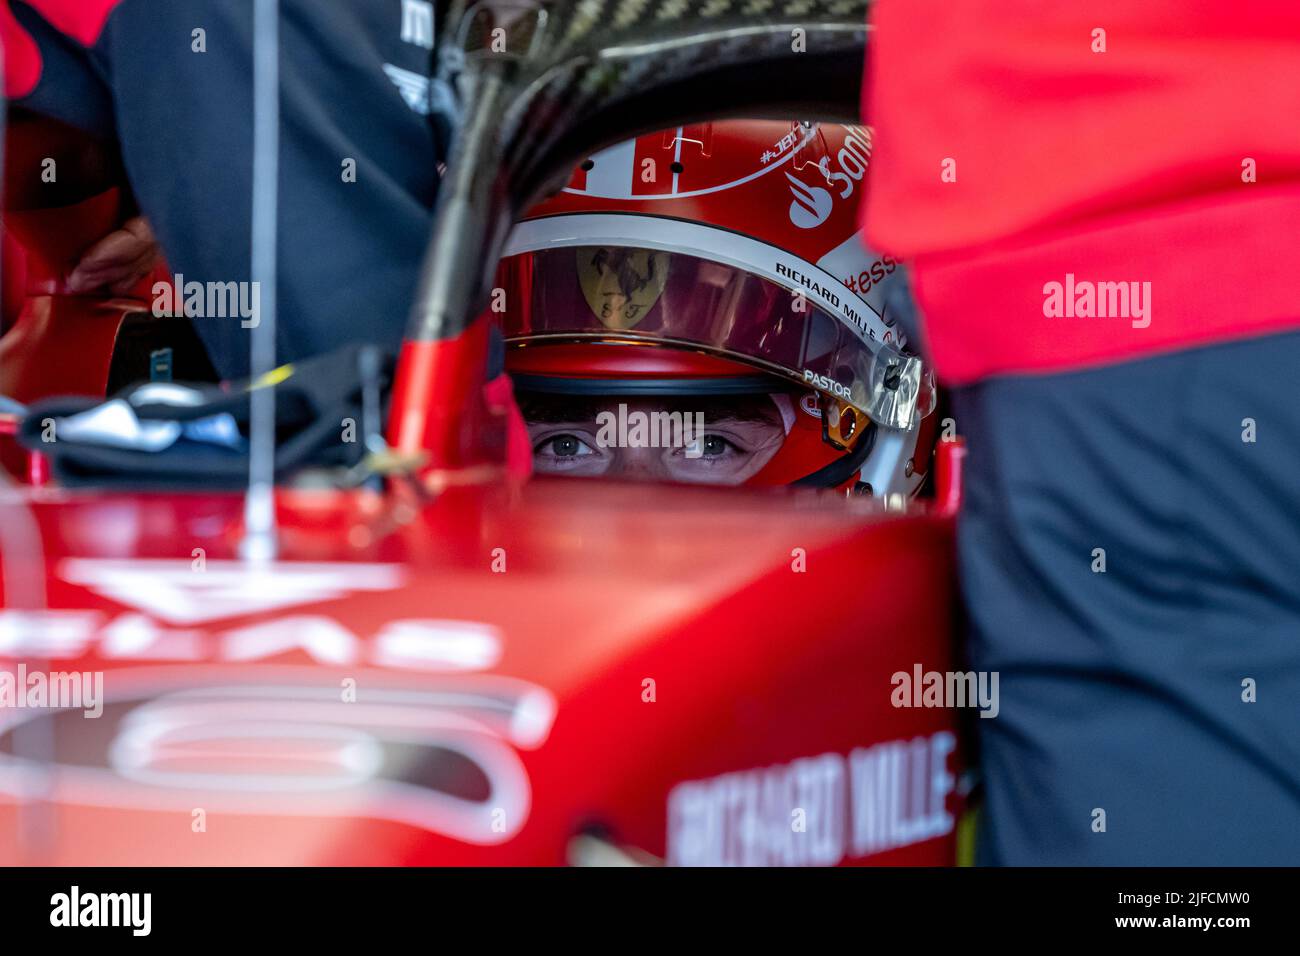 Silverstone, UK, 01st Jul 2022, Charles Leclerc, from Monaco competes for Scuderia Ferrari. Practice, round 10 of the 2022 Formula 1 championship. Credit: Michael Potts/Alamy Live News Stock Photo